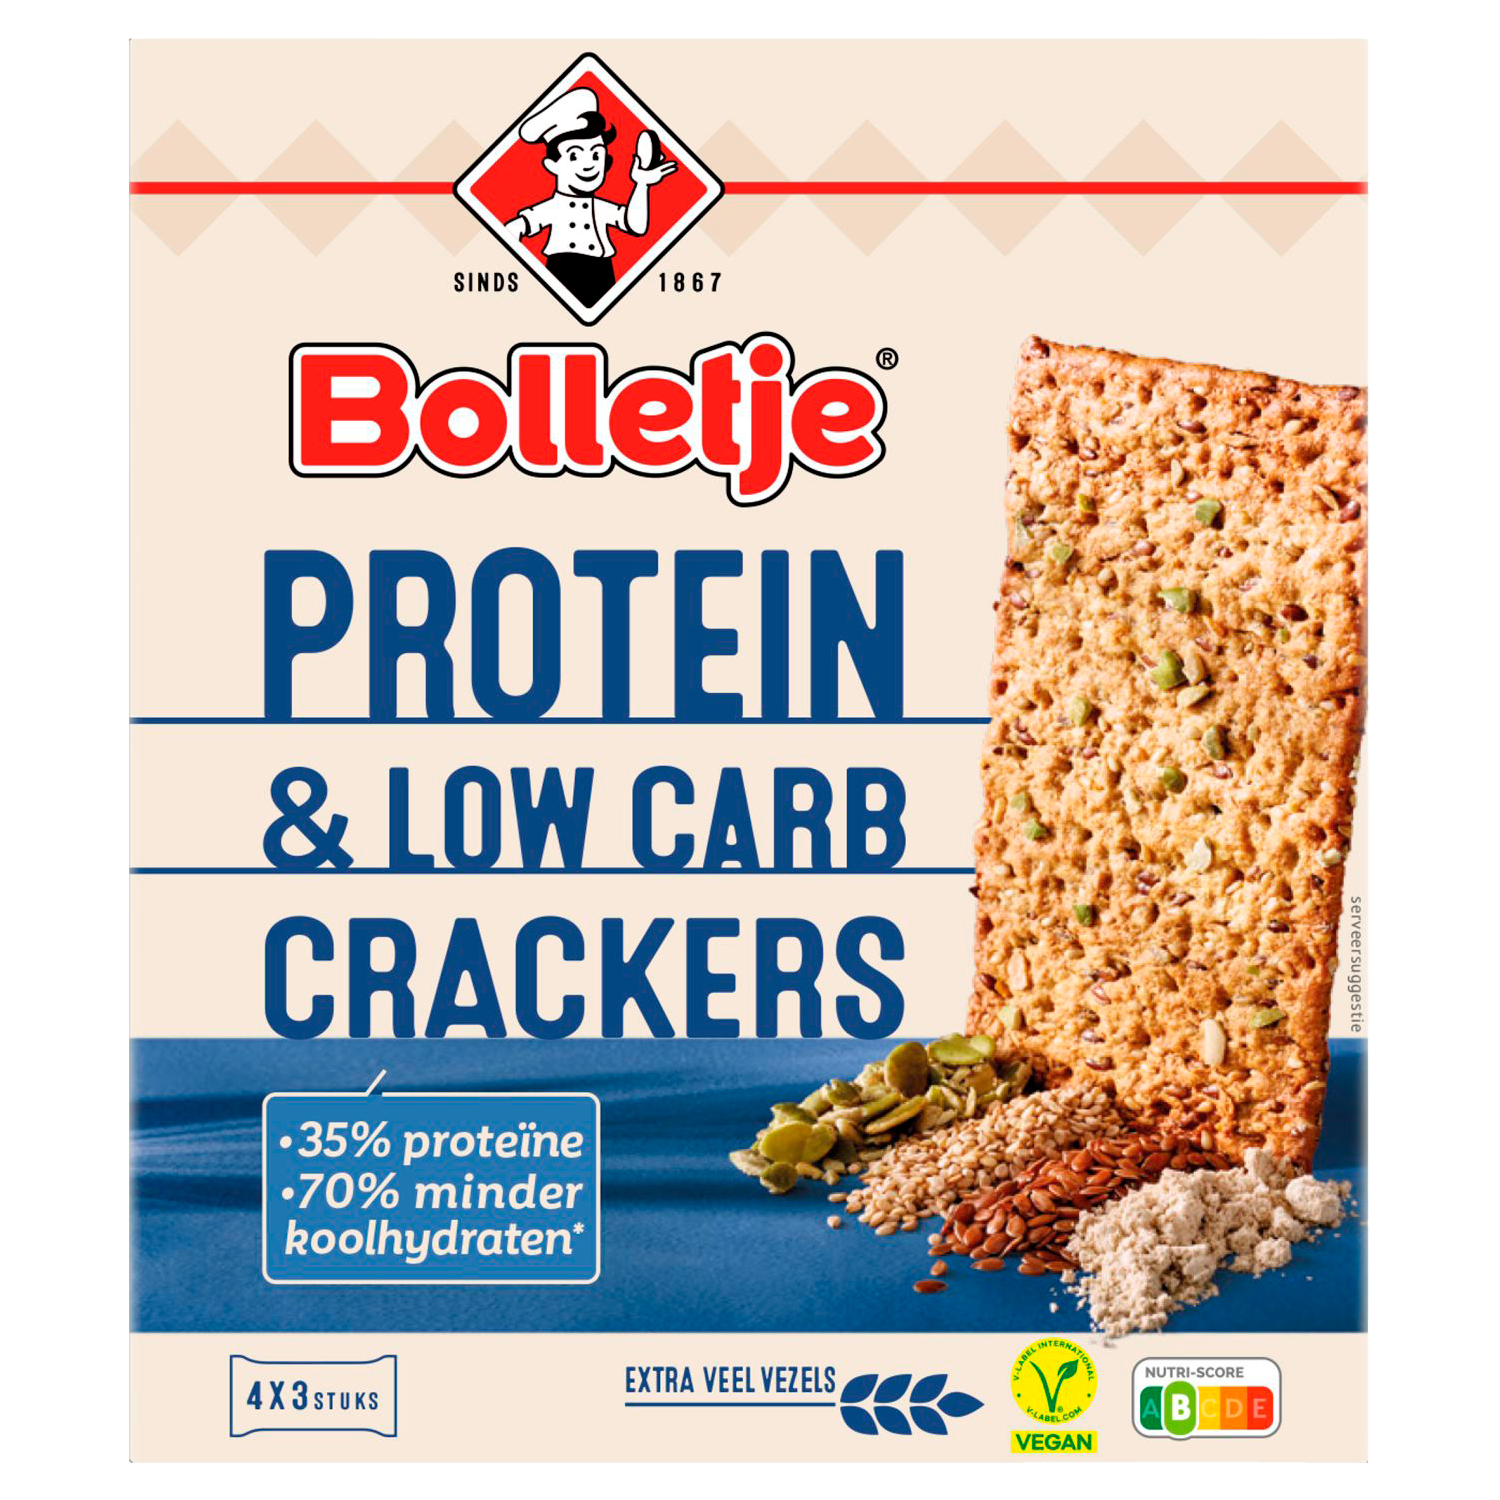 Bolletje Crackers protein low carb